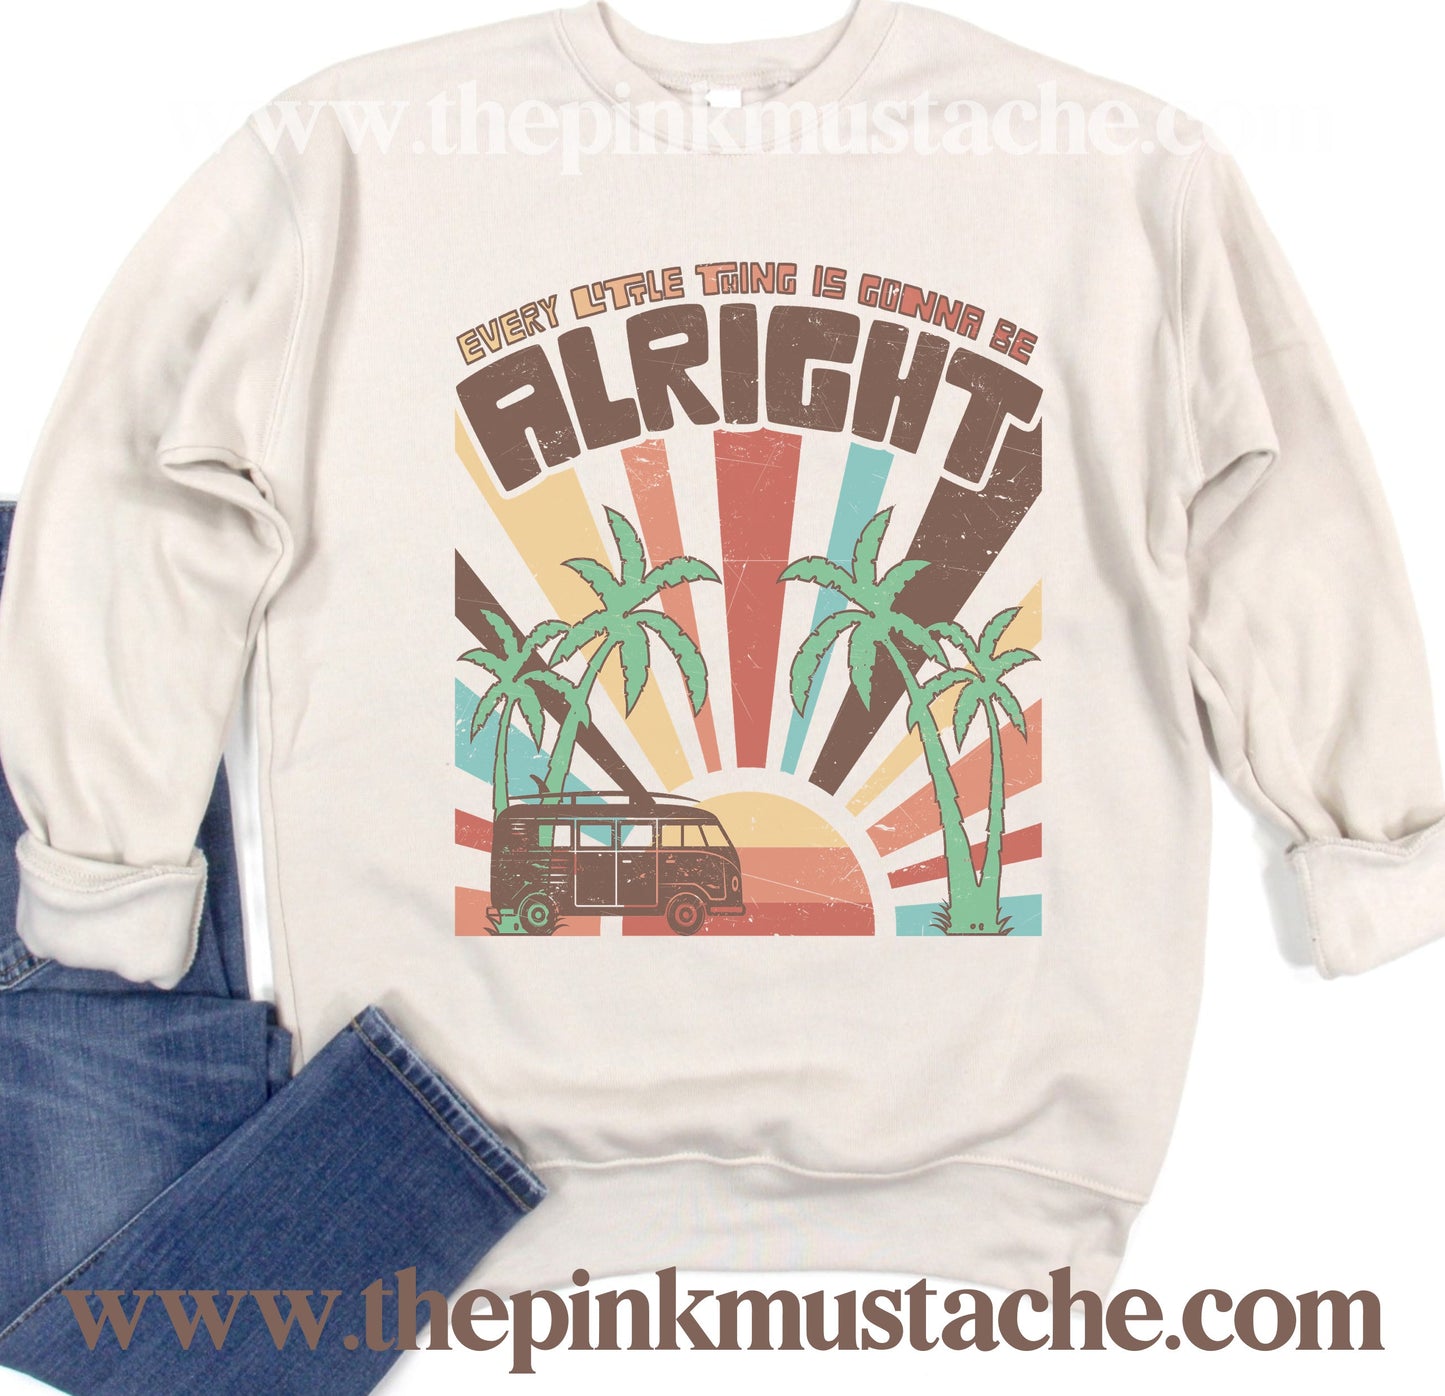 Softstyle Sweatshirt Every Little Thing Is Going To Be All Right Hippie Retro